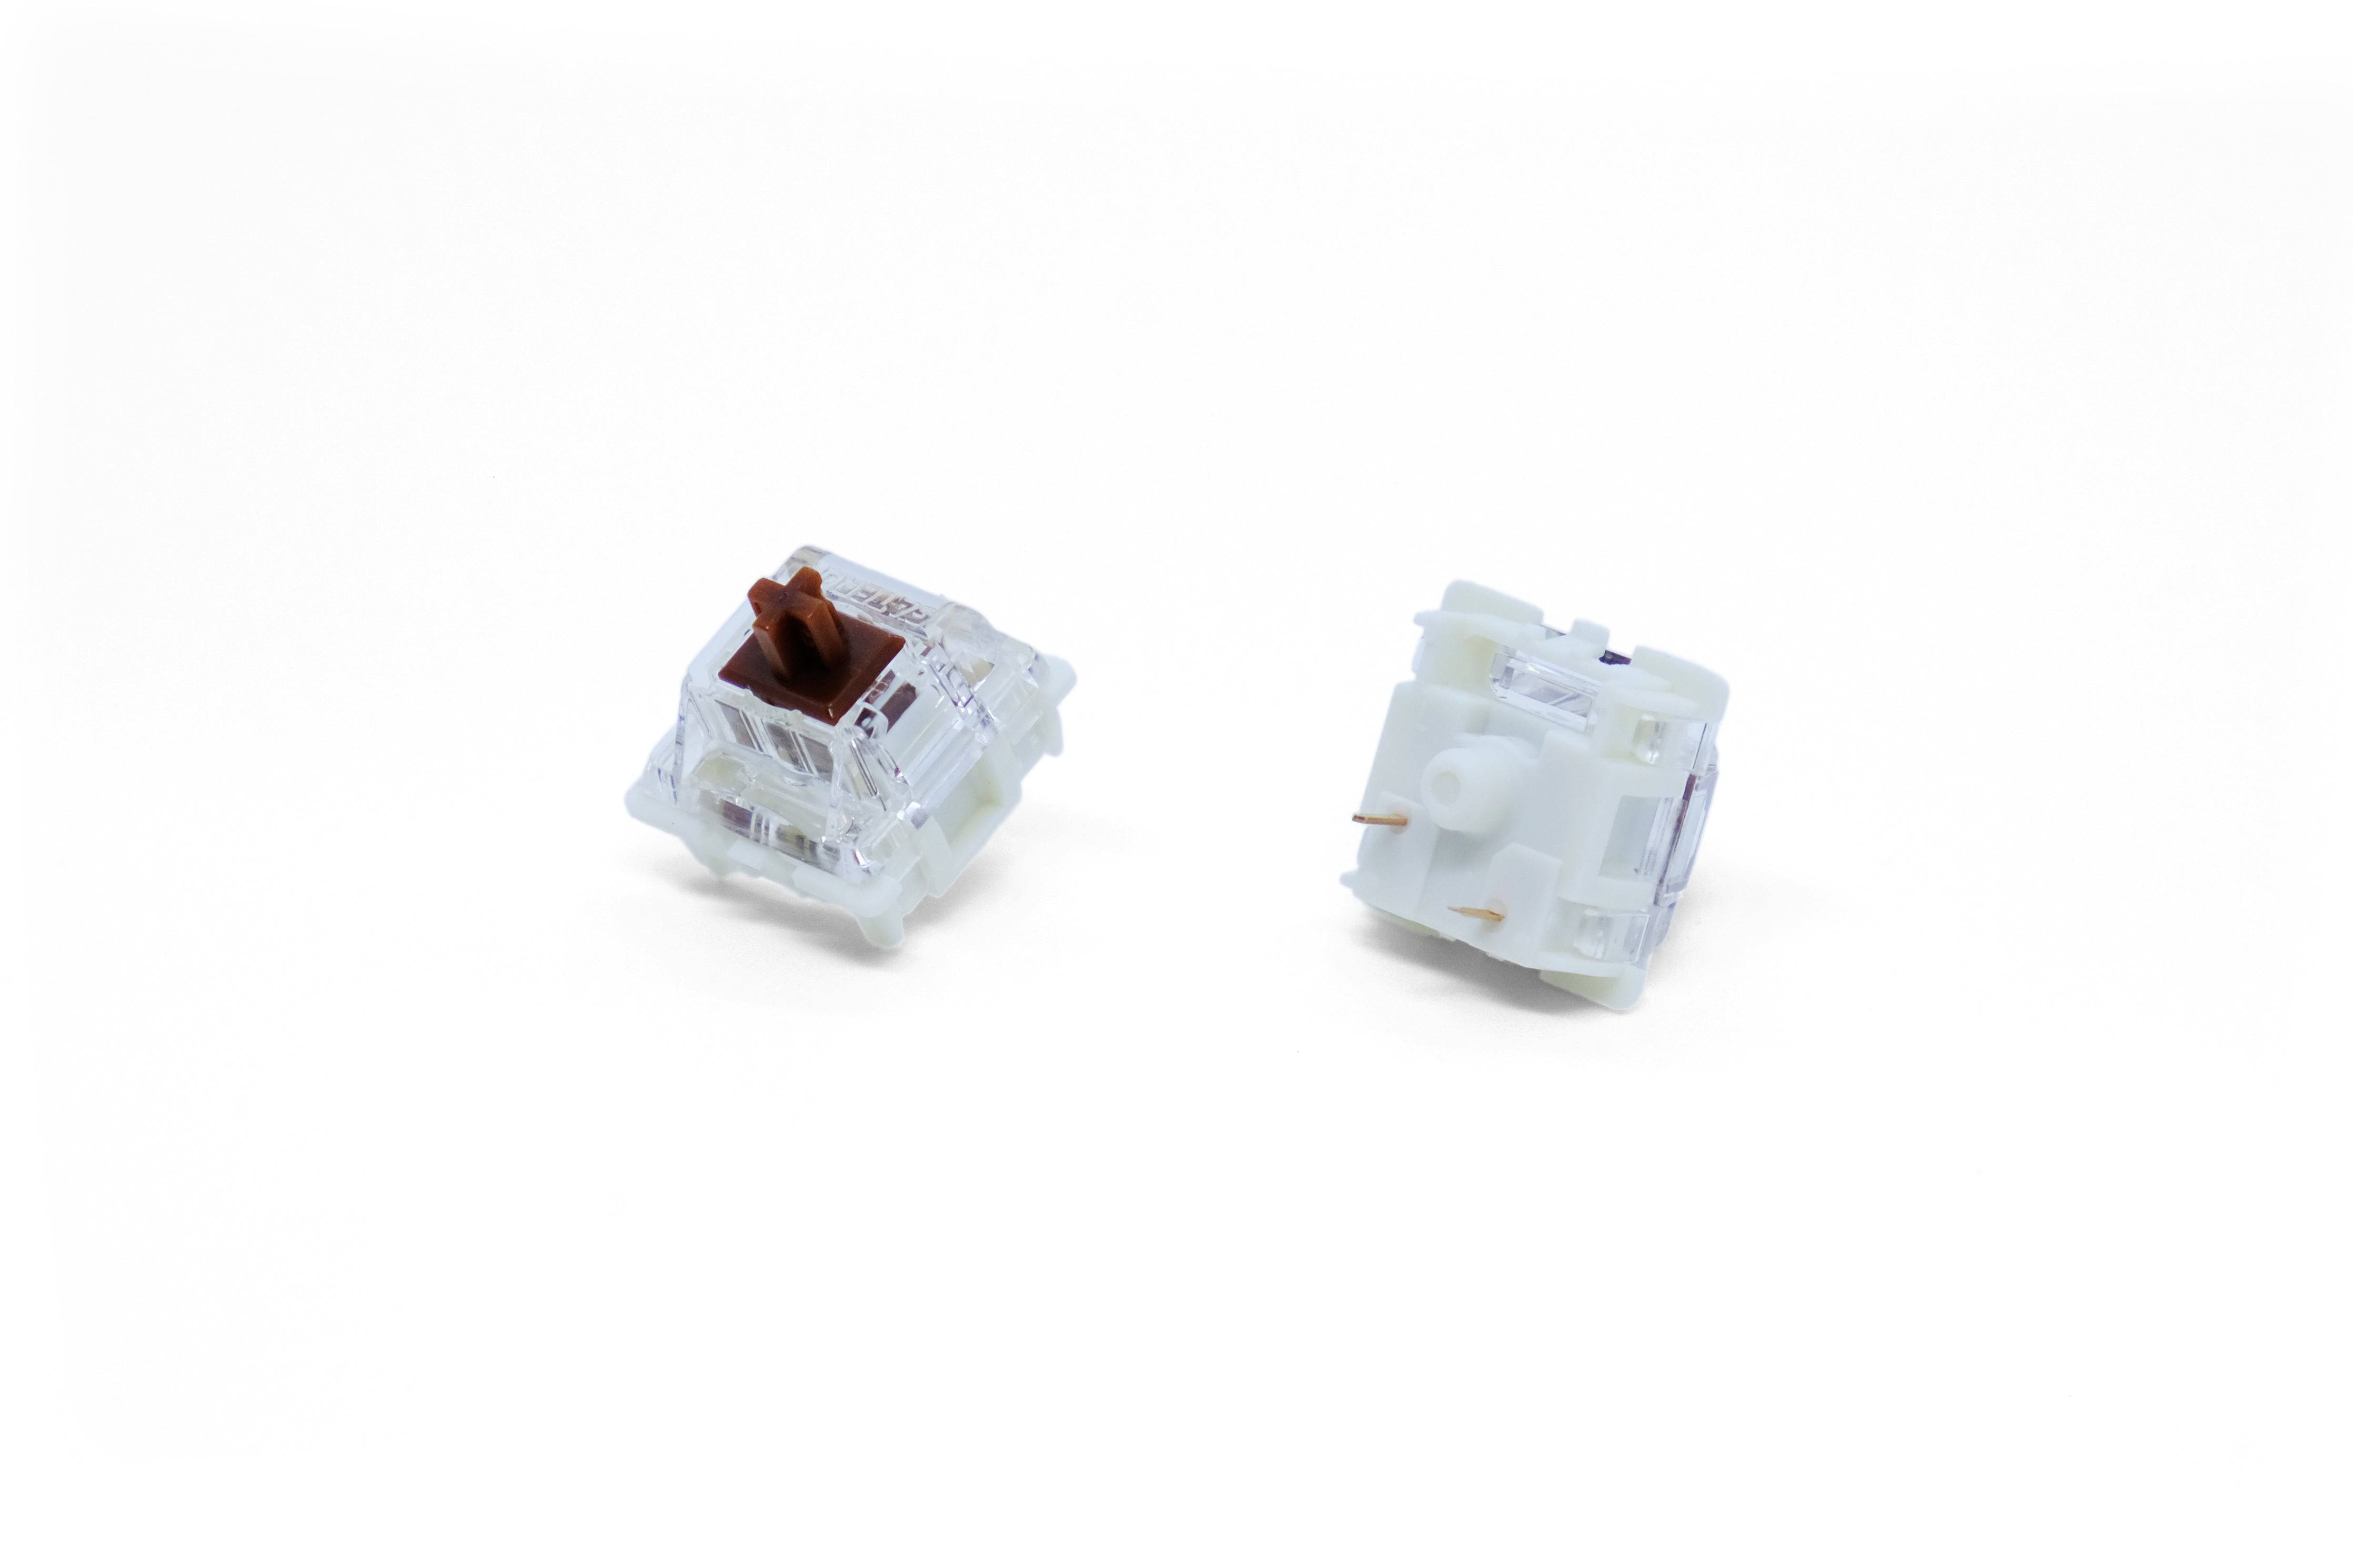 Gateron KS-9 Pro 2.0 Brown Tactile Switches at KeebsForAll